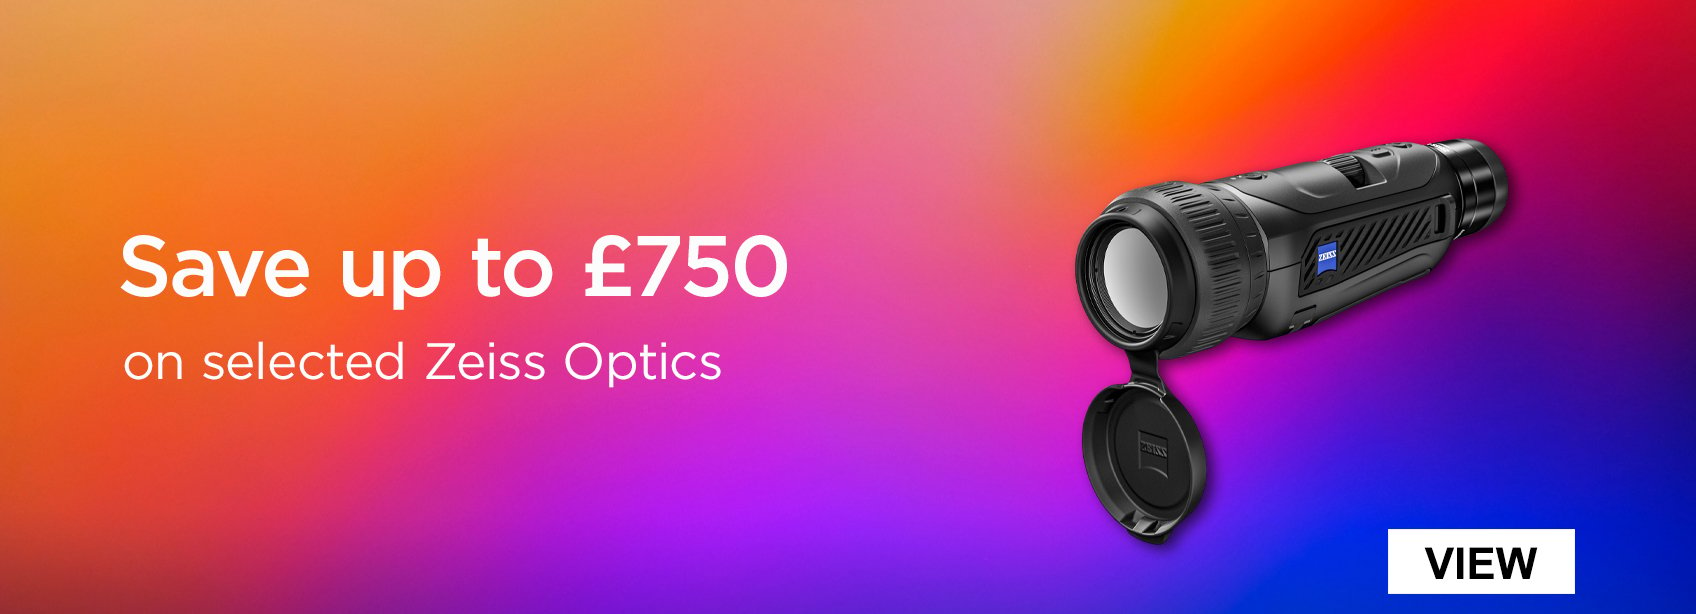 Save up to £750 on selected Zeiss Optics